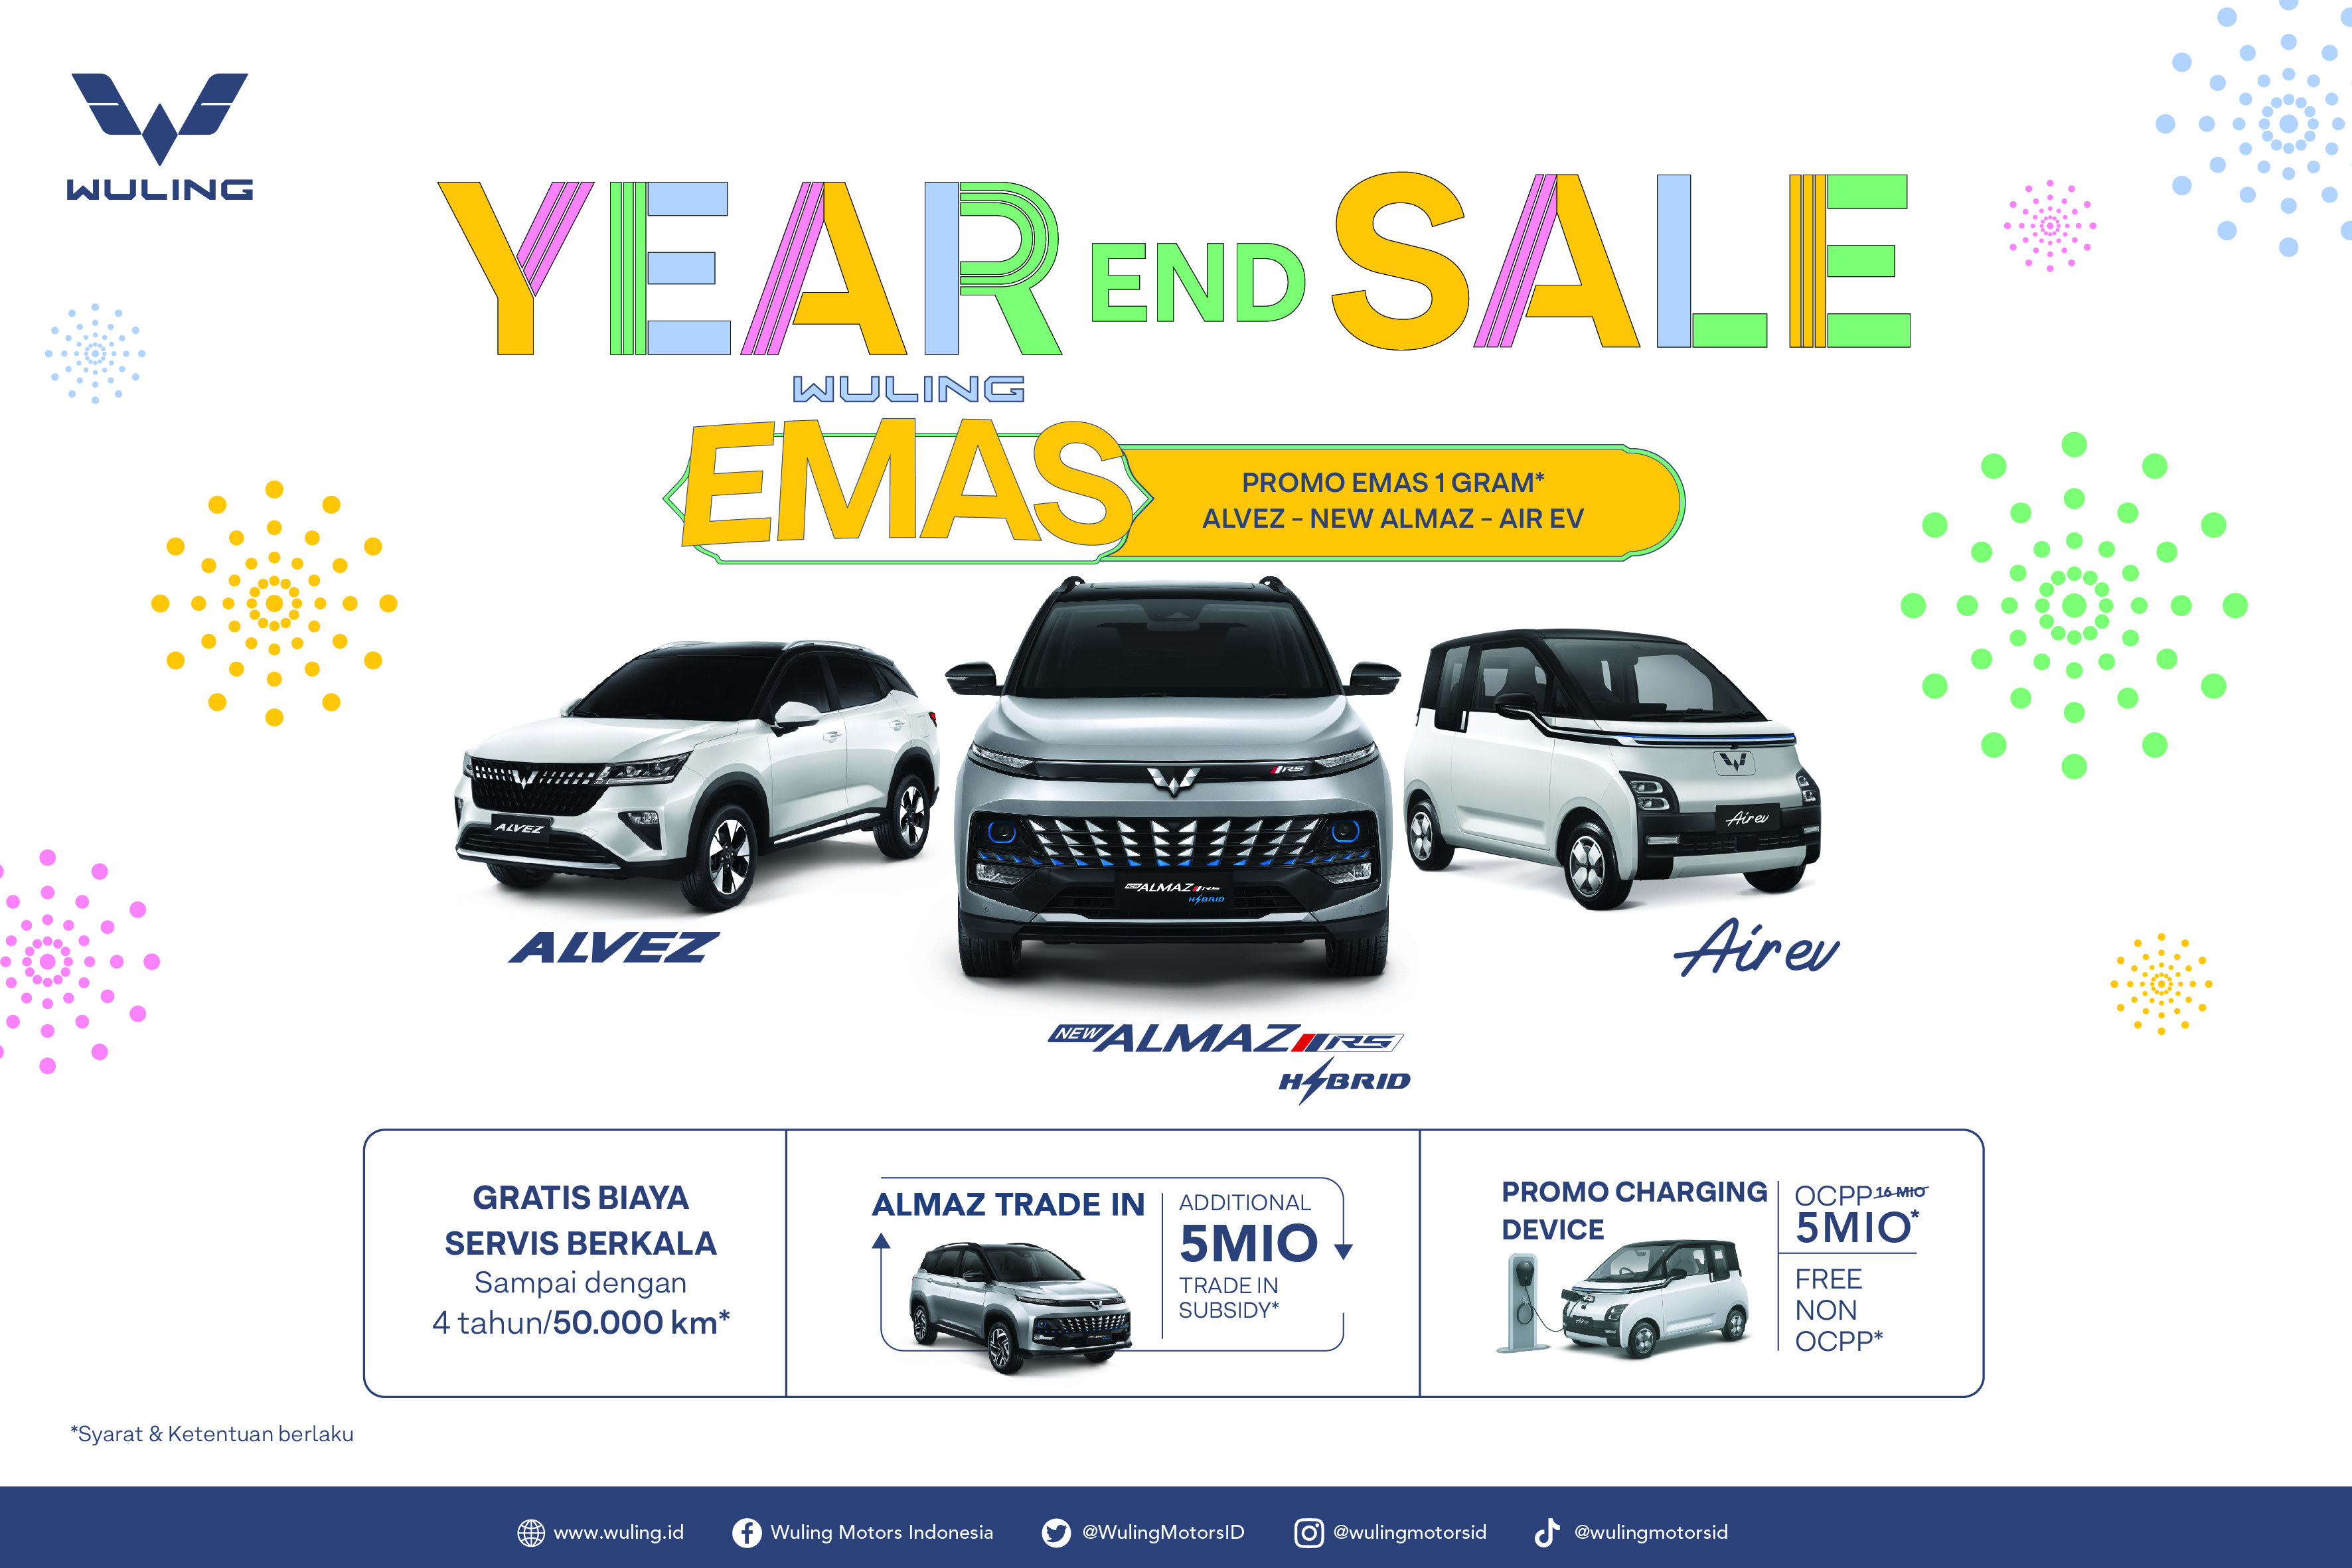 Image Celebrating November, Wuling Carries out The ‘Year End Sale’ Promo Program